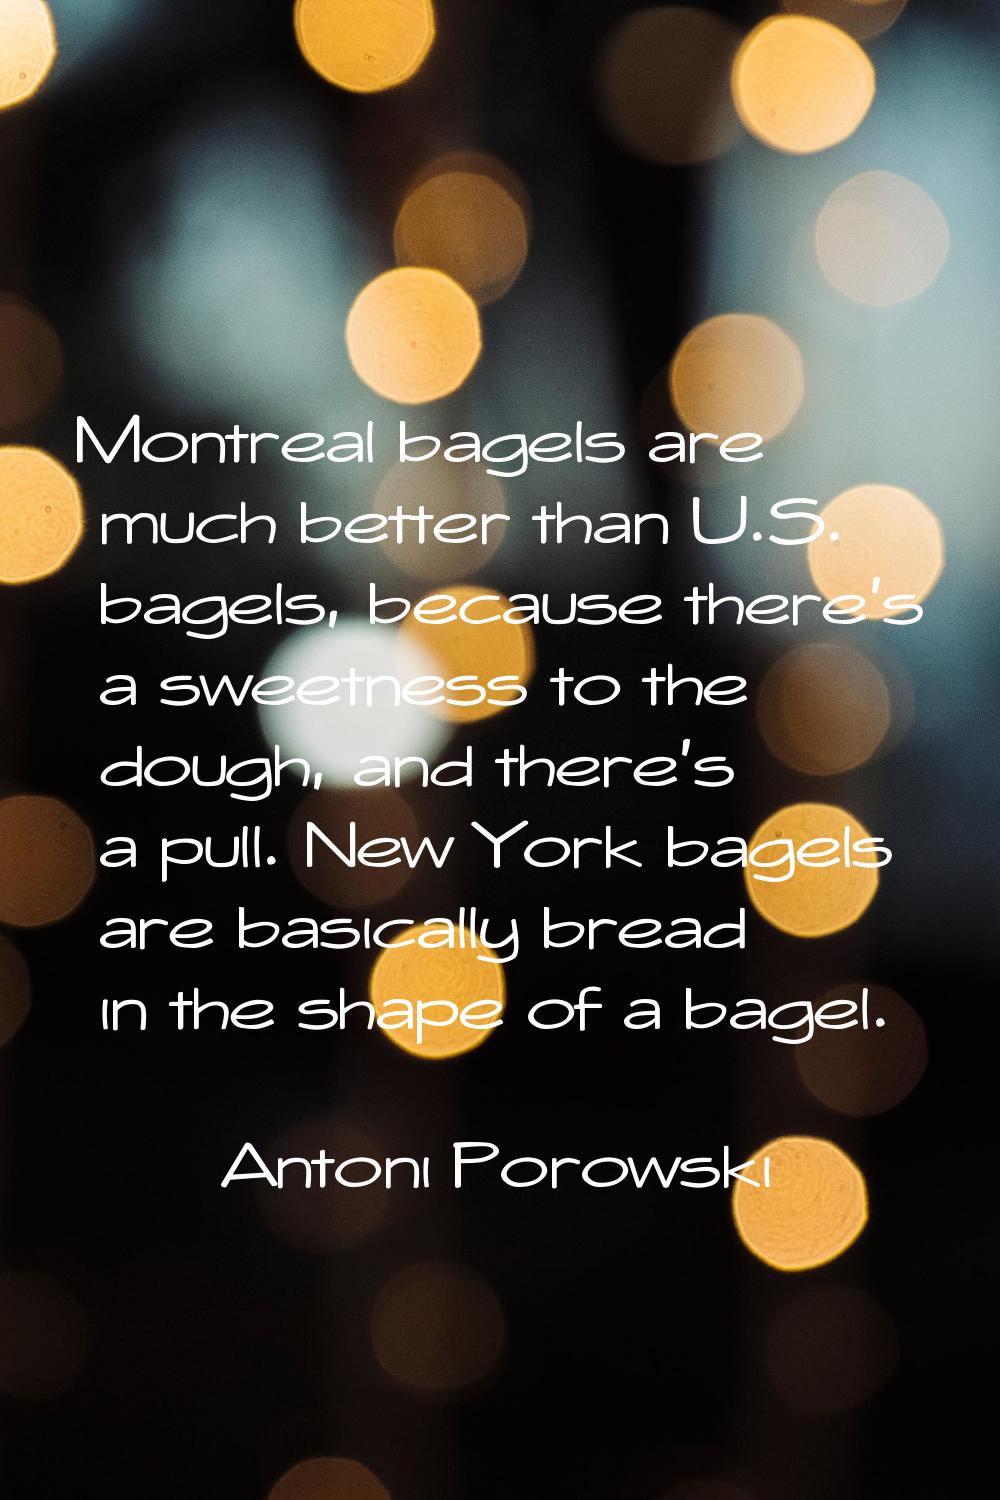 Montreal bagels are much better than U.S. bagels, because there's a sweetness to the dough, and the